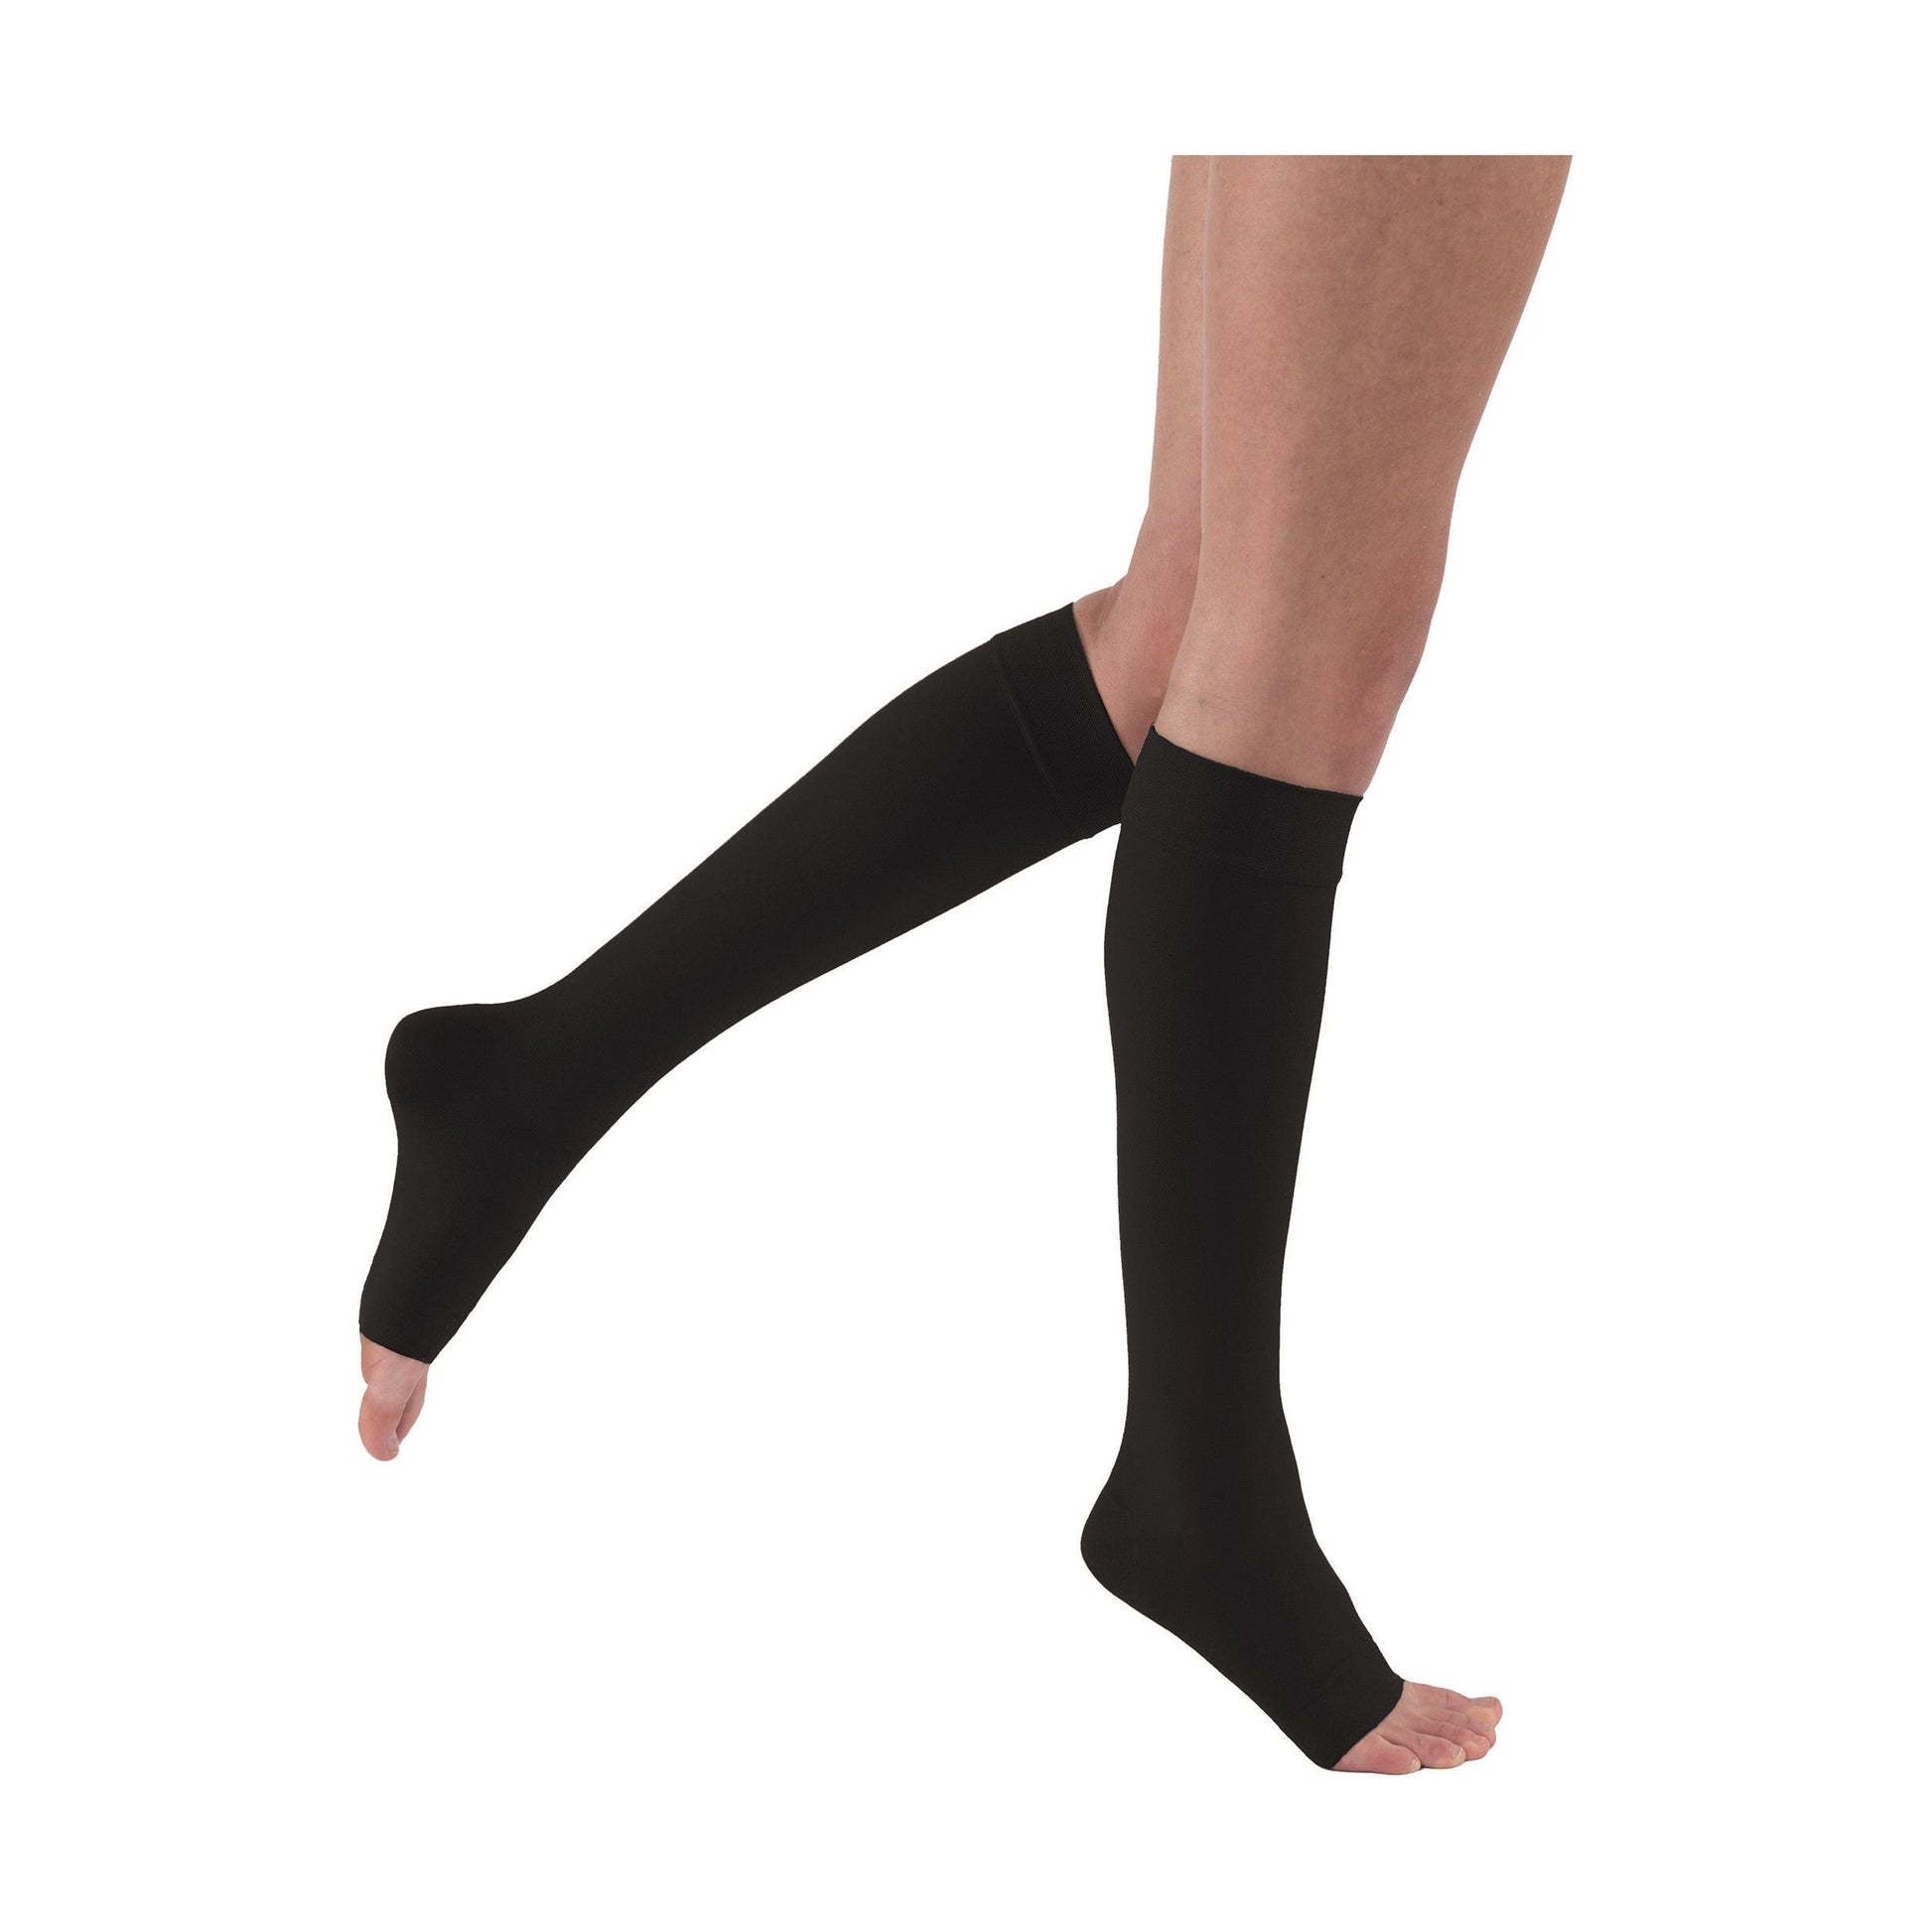 Thigh High Compression Stockings Open Toe Pair Firm Support 20-30mmHg  Gradient Compression Socks with Silicone